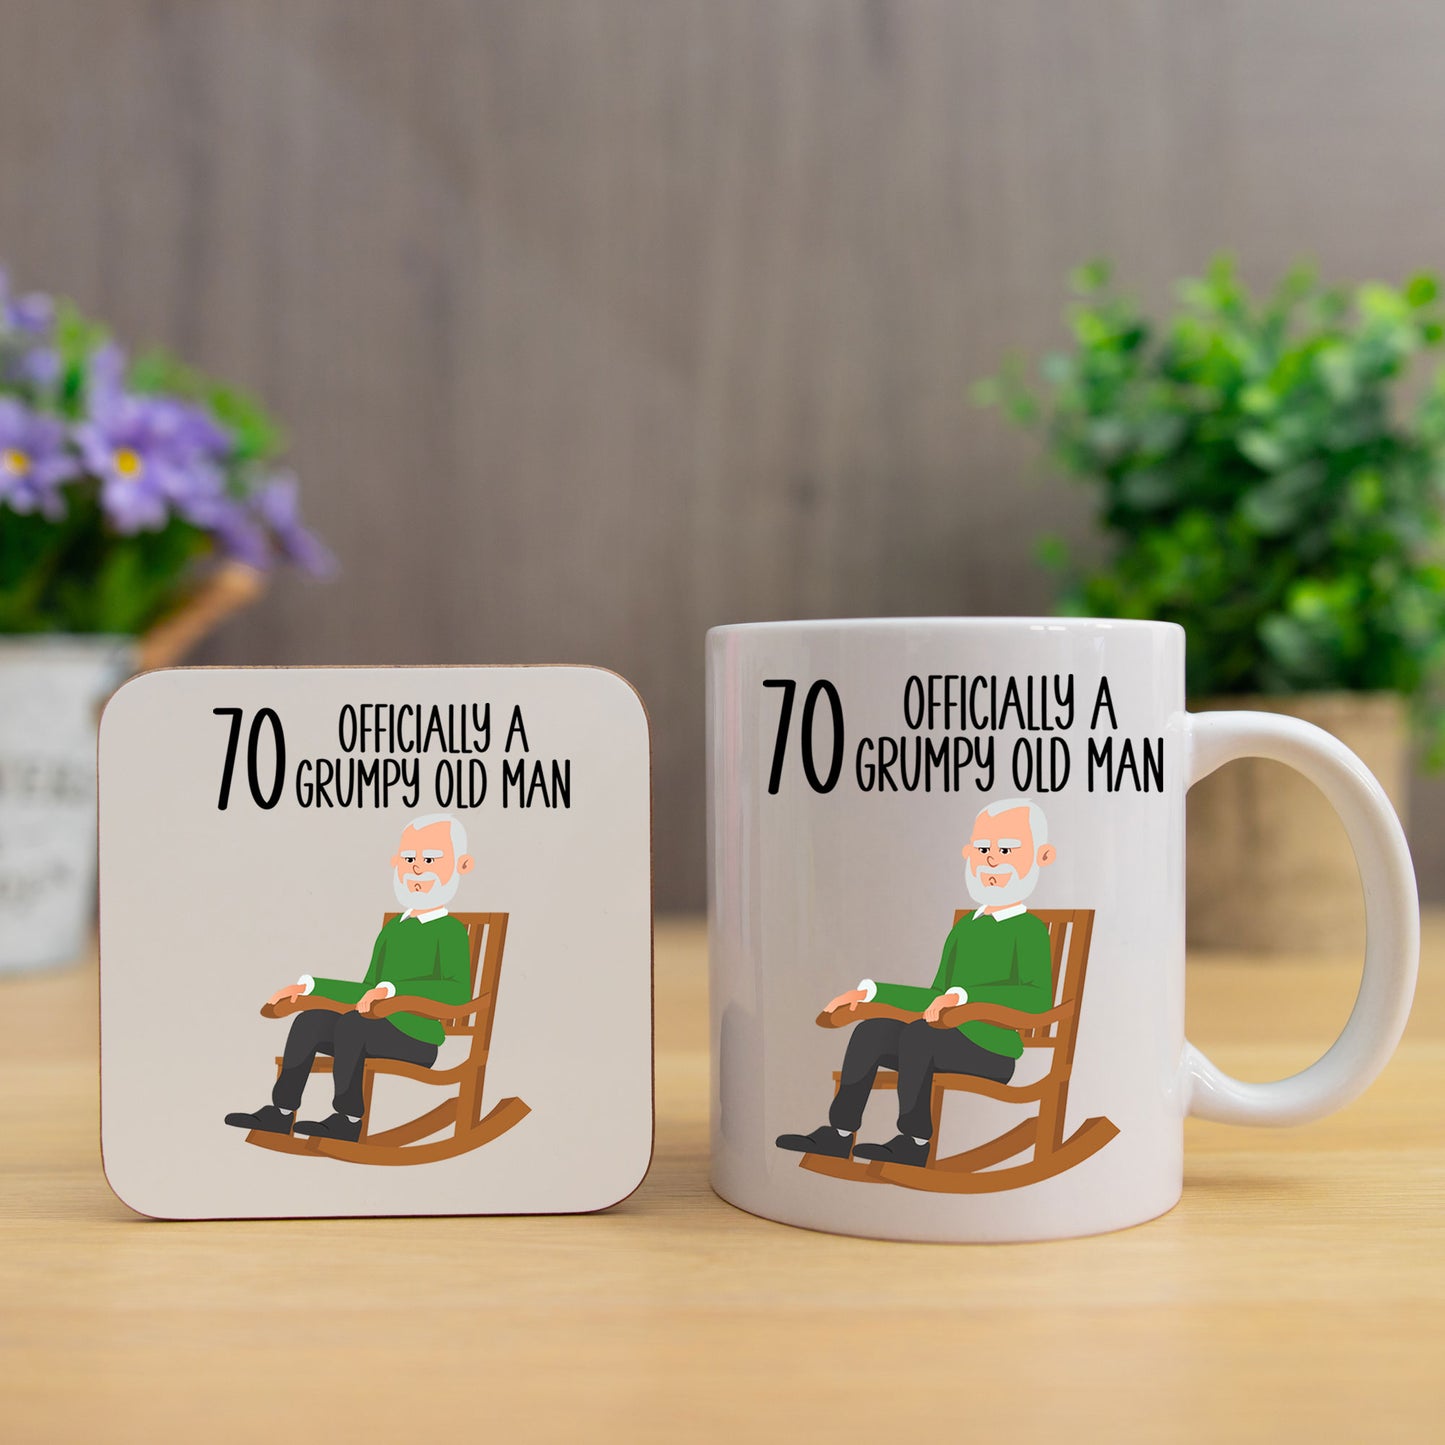 70 Officially A Grumpy Old Man Mug and/or Coaster Gift  - Always Looking Good -   